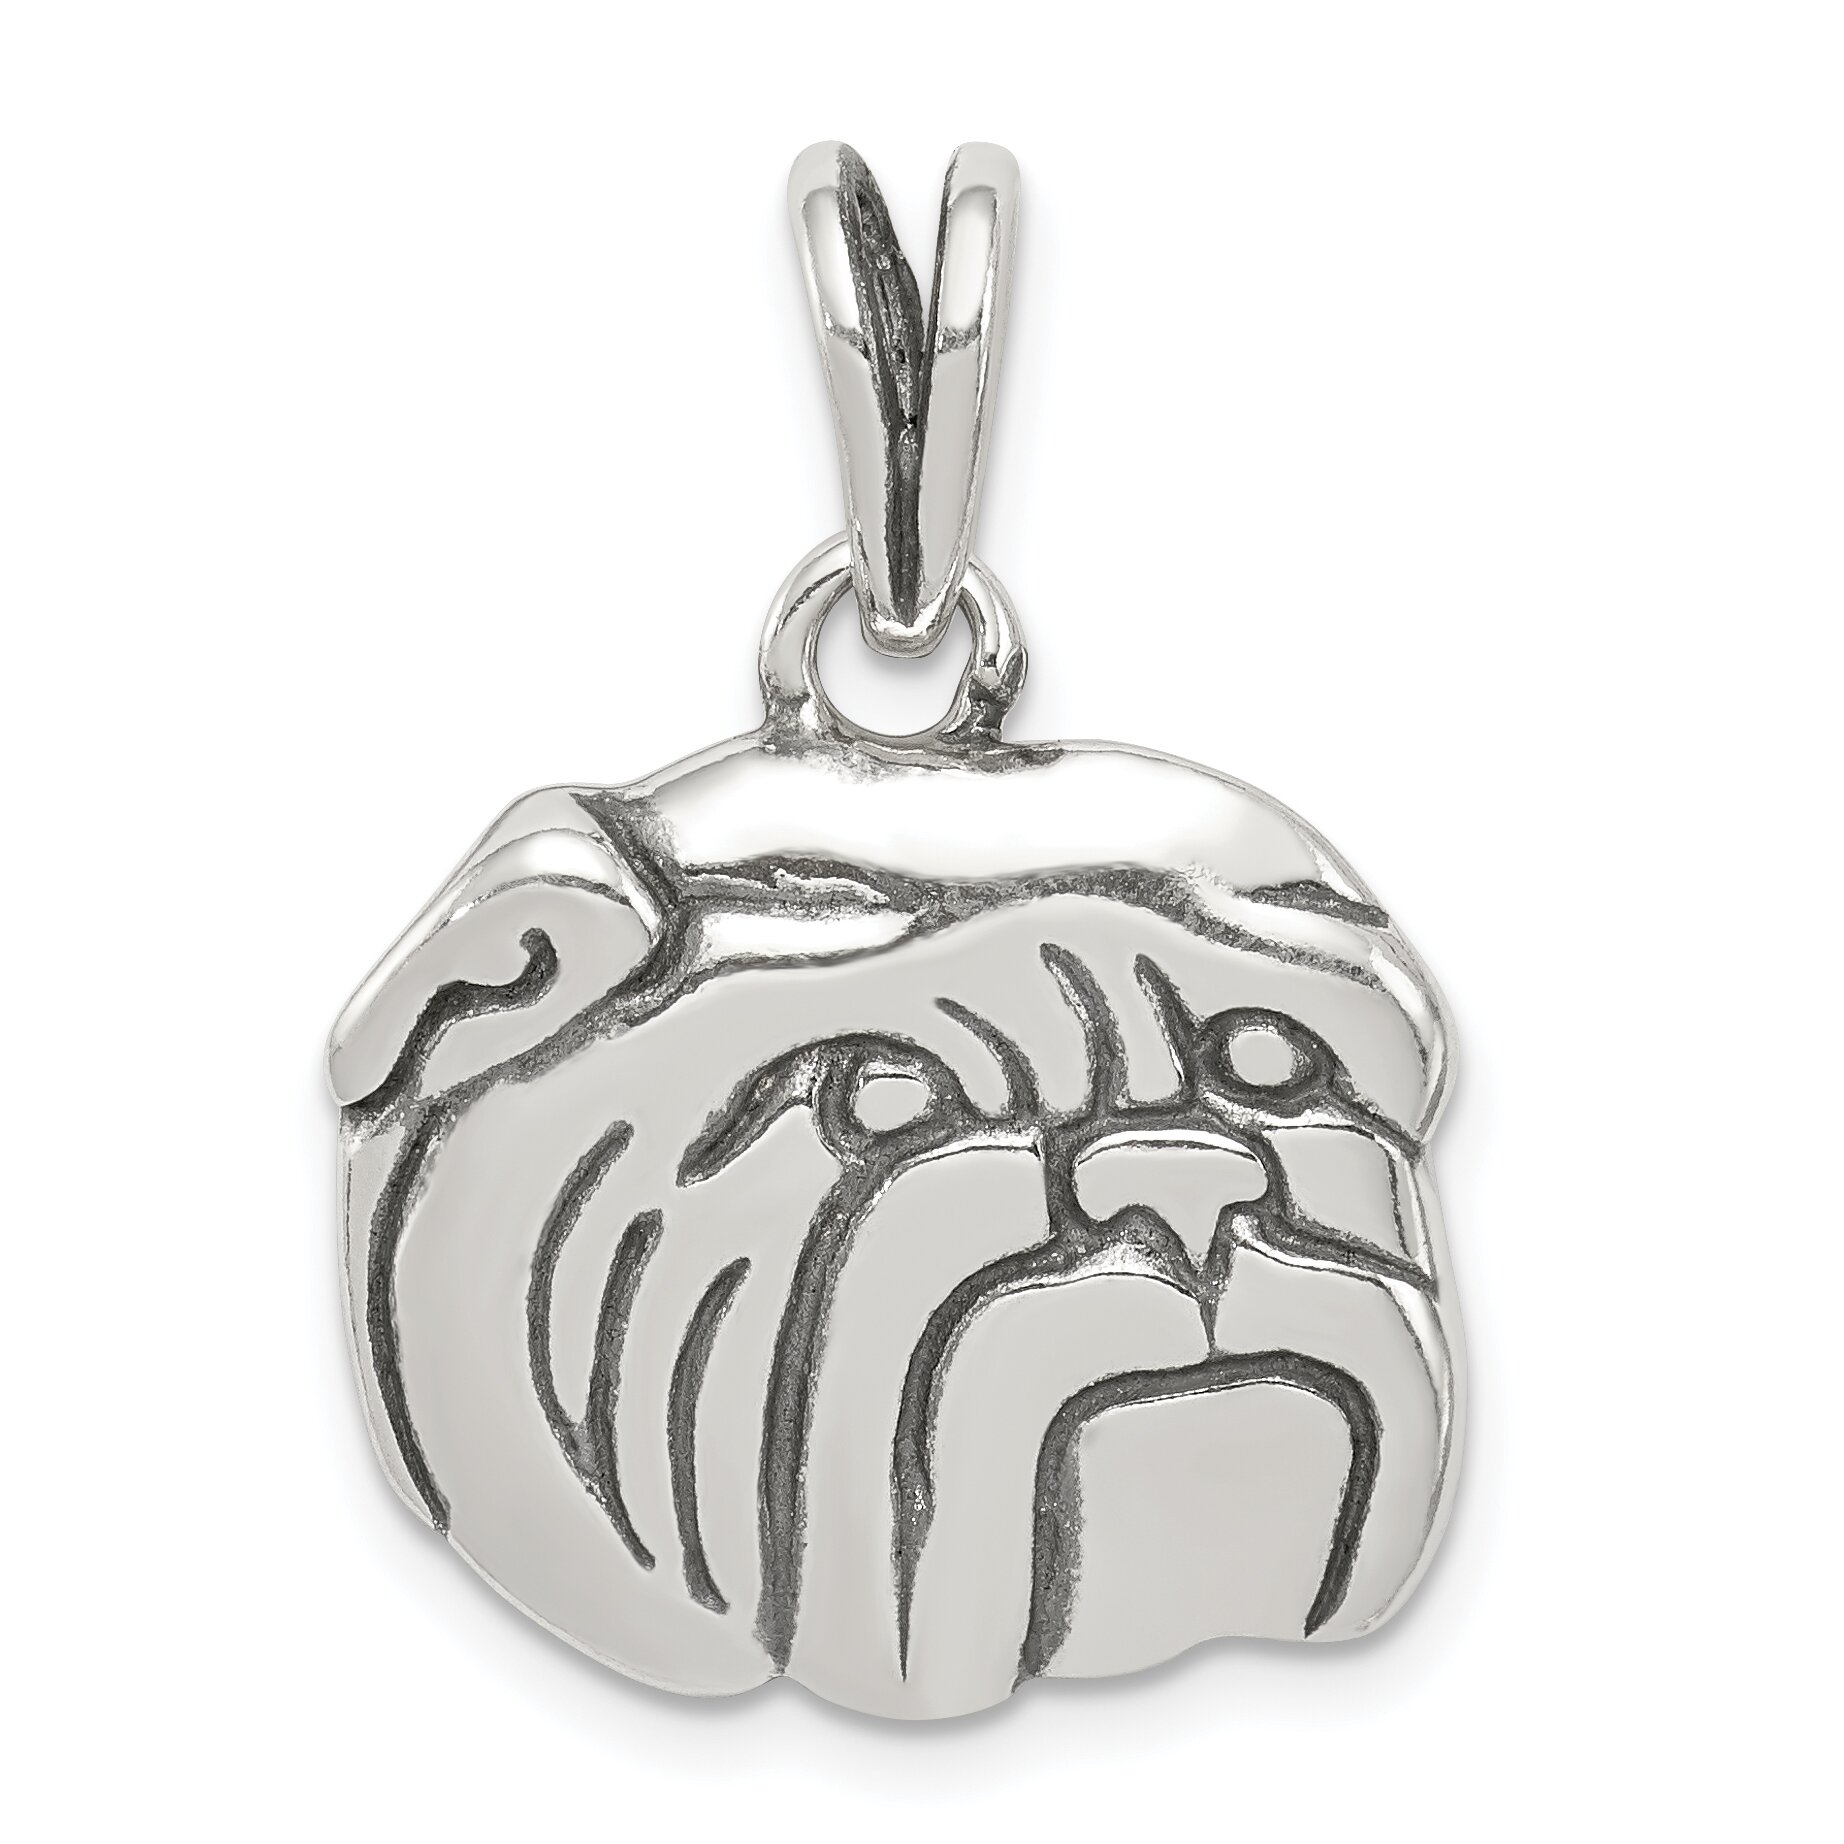 Findingking Sterling Silver Antiqued Bulldog Charm